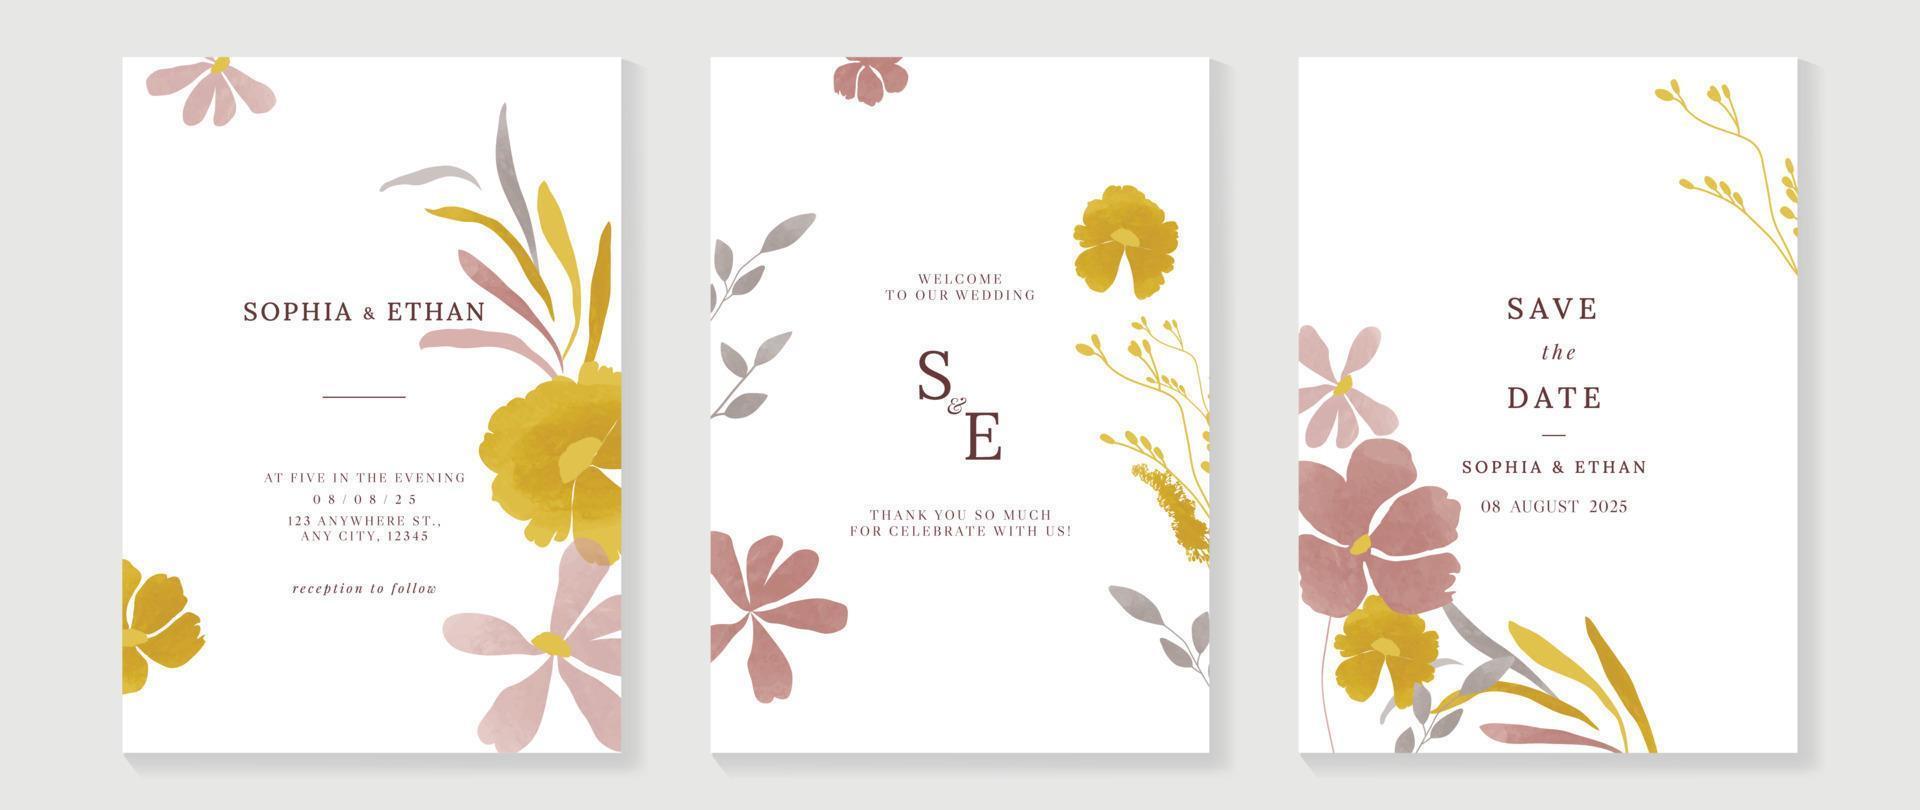 Luxury wedding invitation card background vector. Minimal hand painted watercolor botanical flowers texture template background. Design illustration for wedding and vip cover template, banner, poster. vector